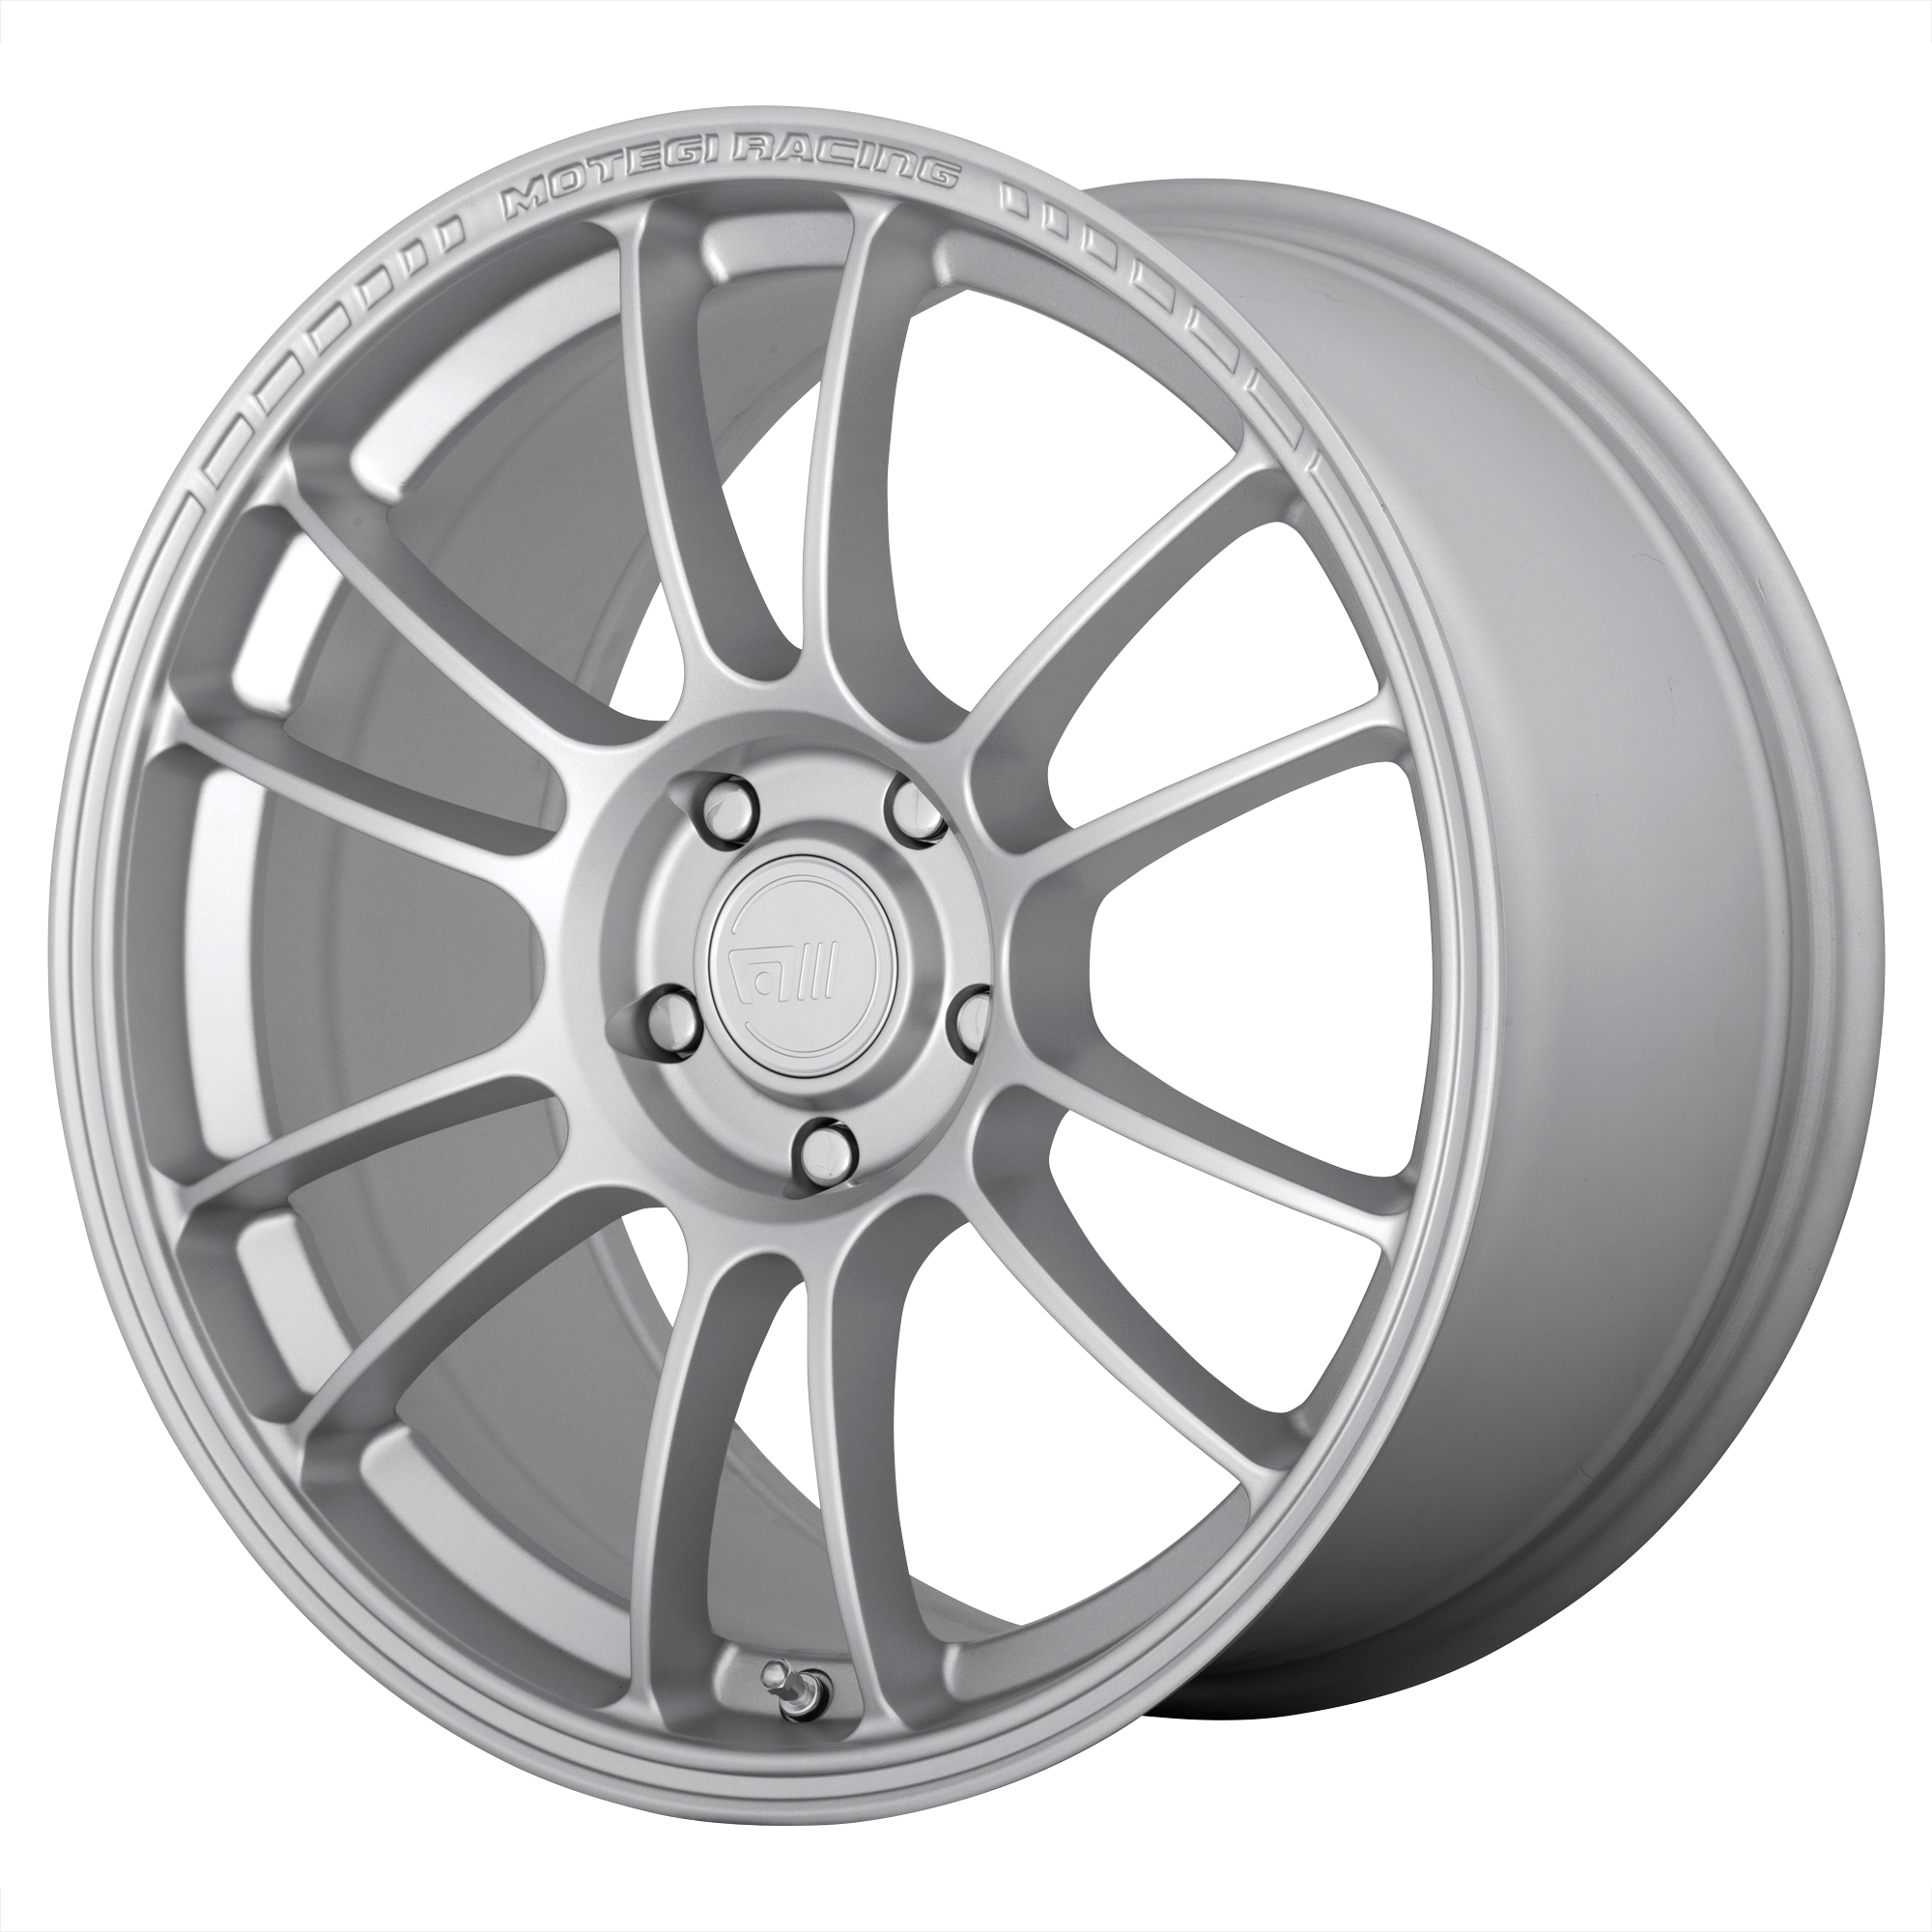 SS6 17x8.5 5x112.00 HYPER SILVER (35 mm) - Tires and Engine Performance